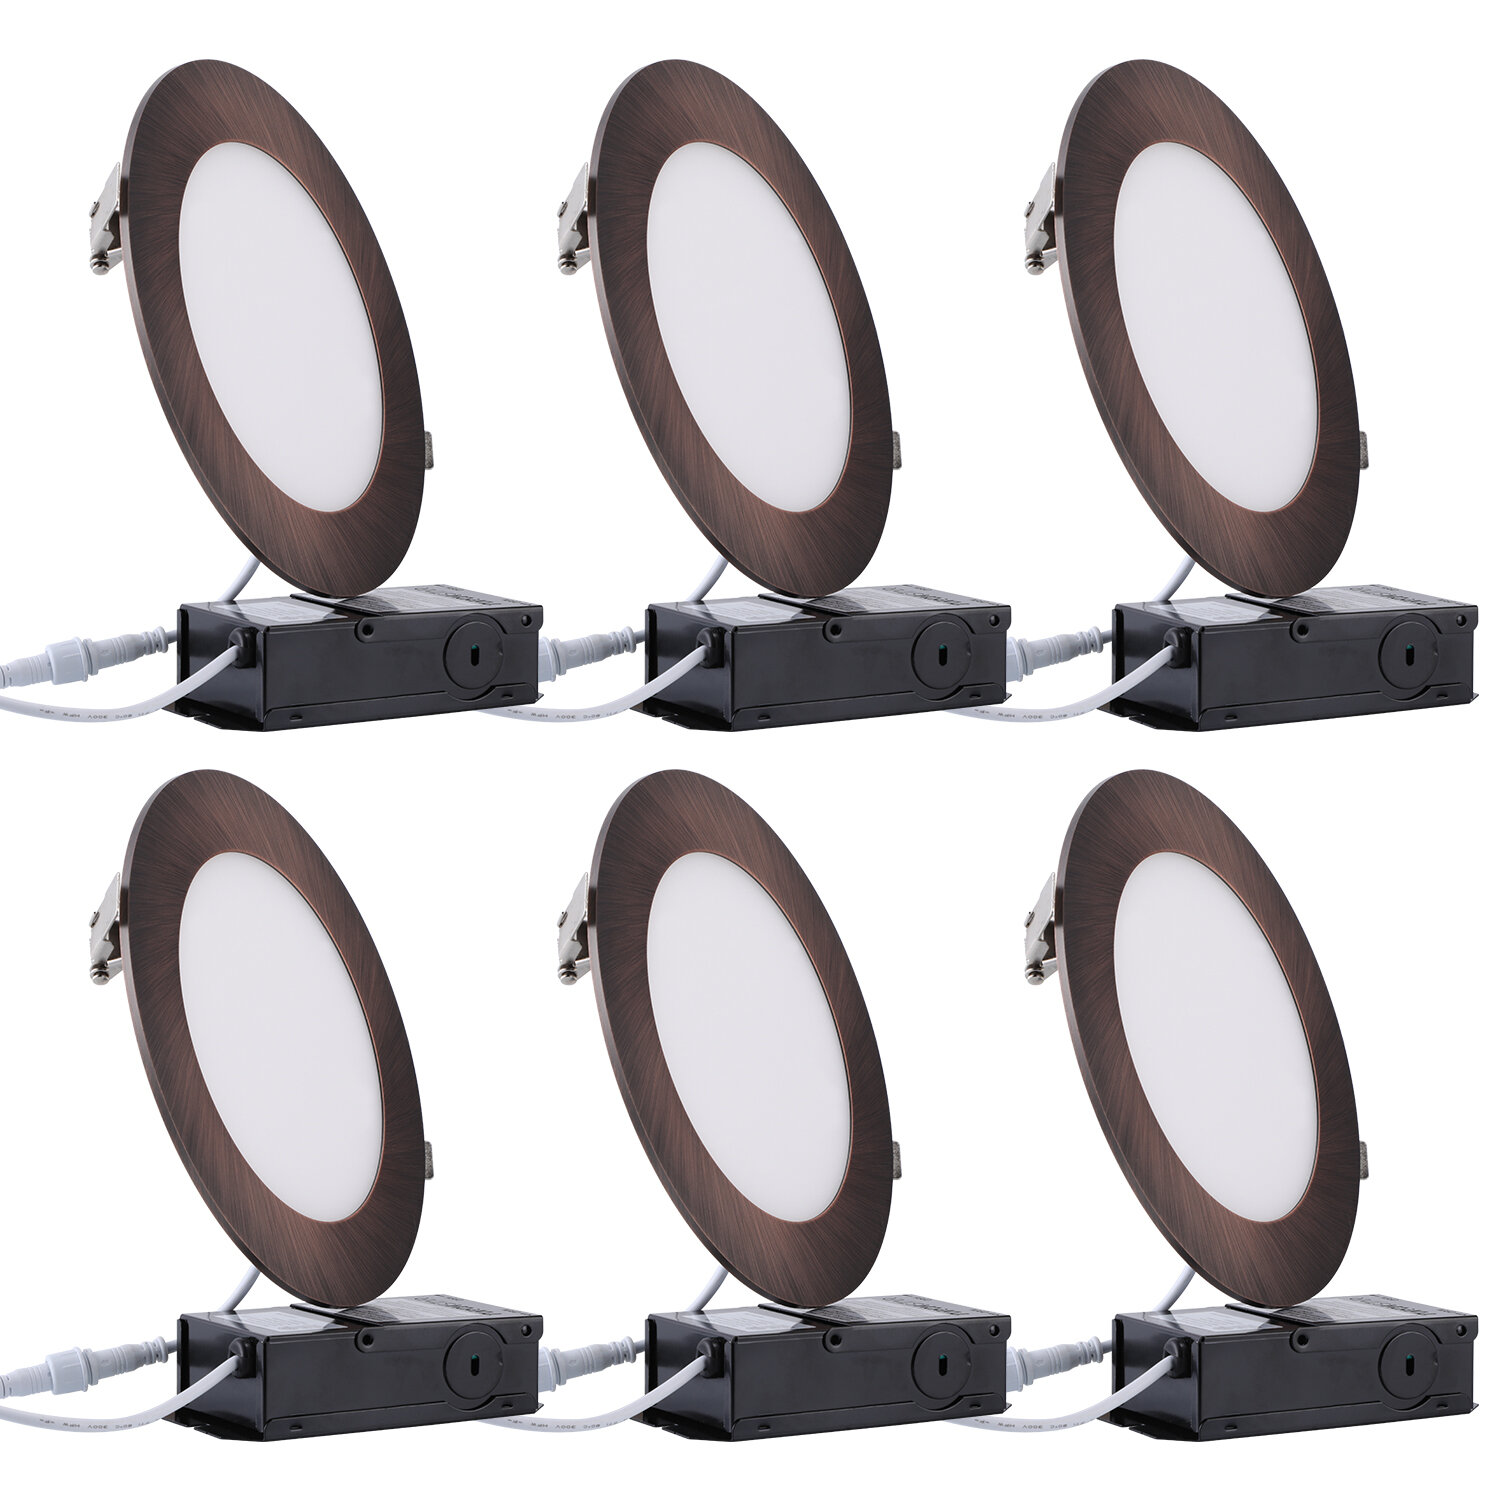 12 Pack Inch Ultra-Thin LED Recessed Ceiling Light with Junction Box, CRI90, 14W=100W, 1100lm, 5000K Daylight White, Dimmable LED Downlight, Canless